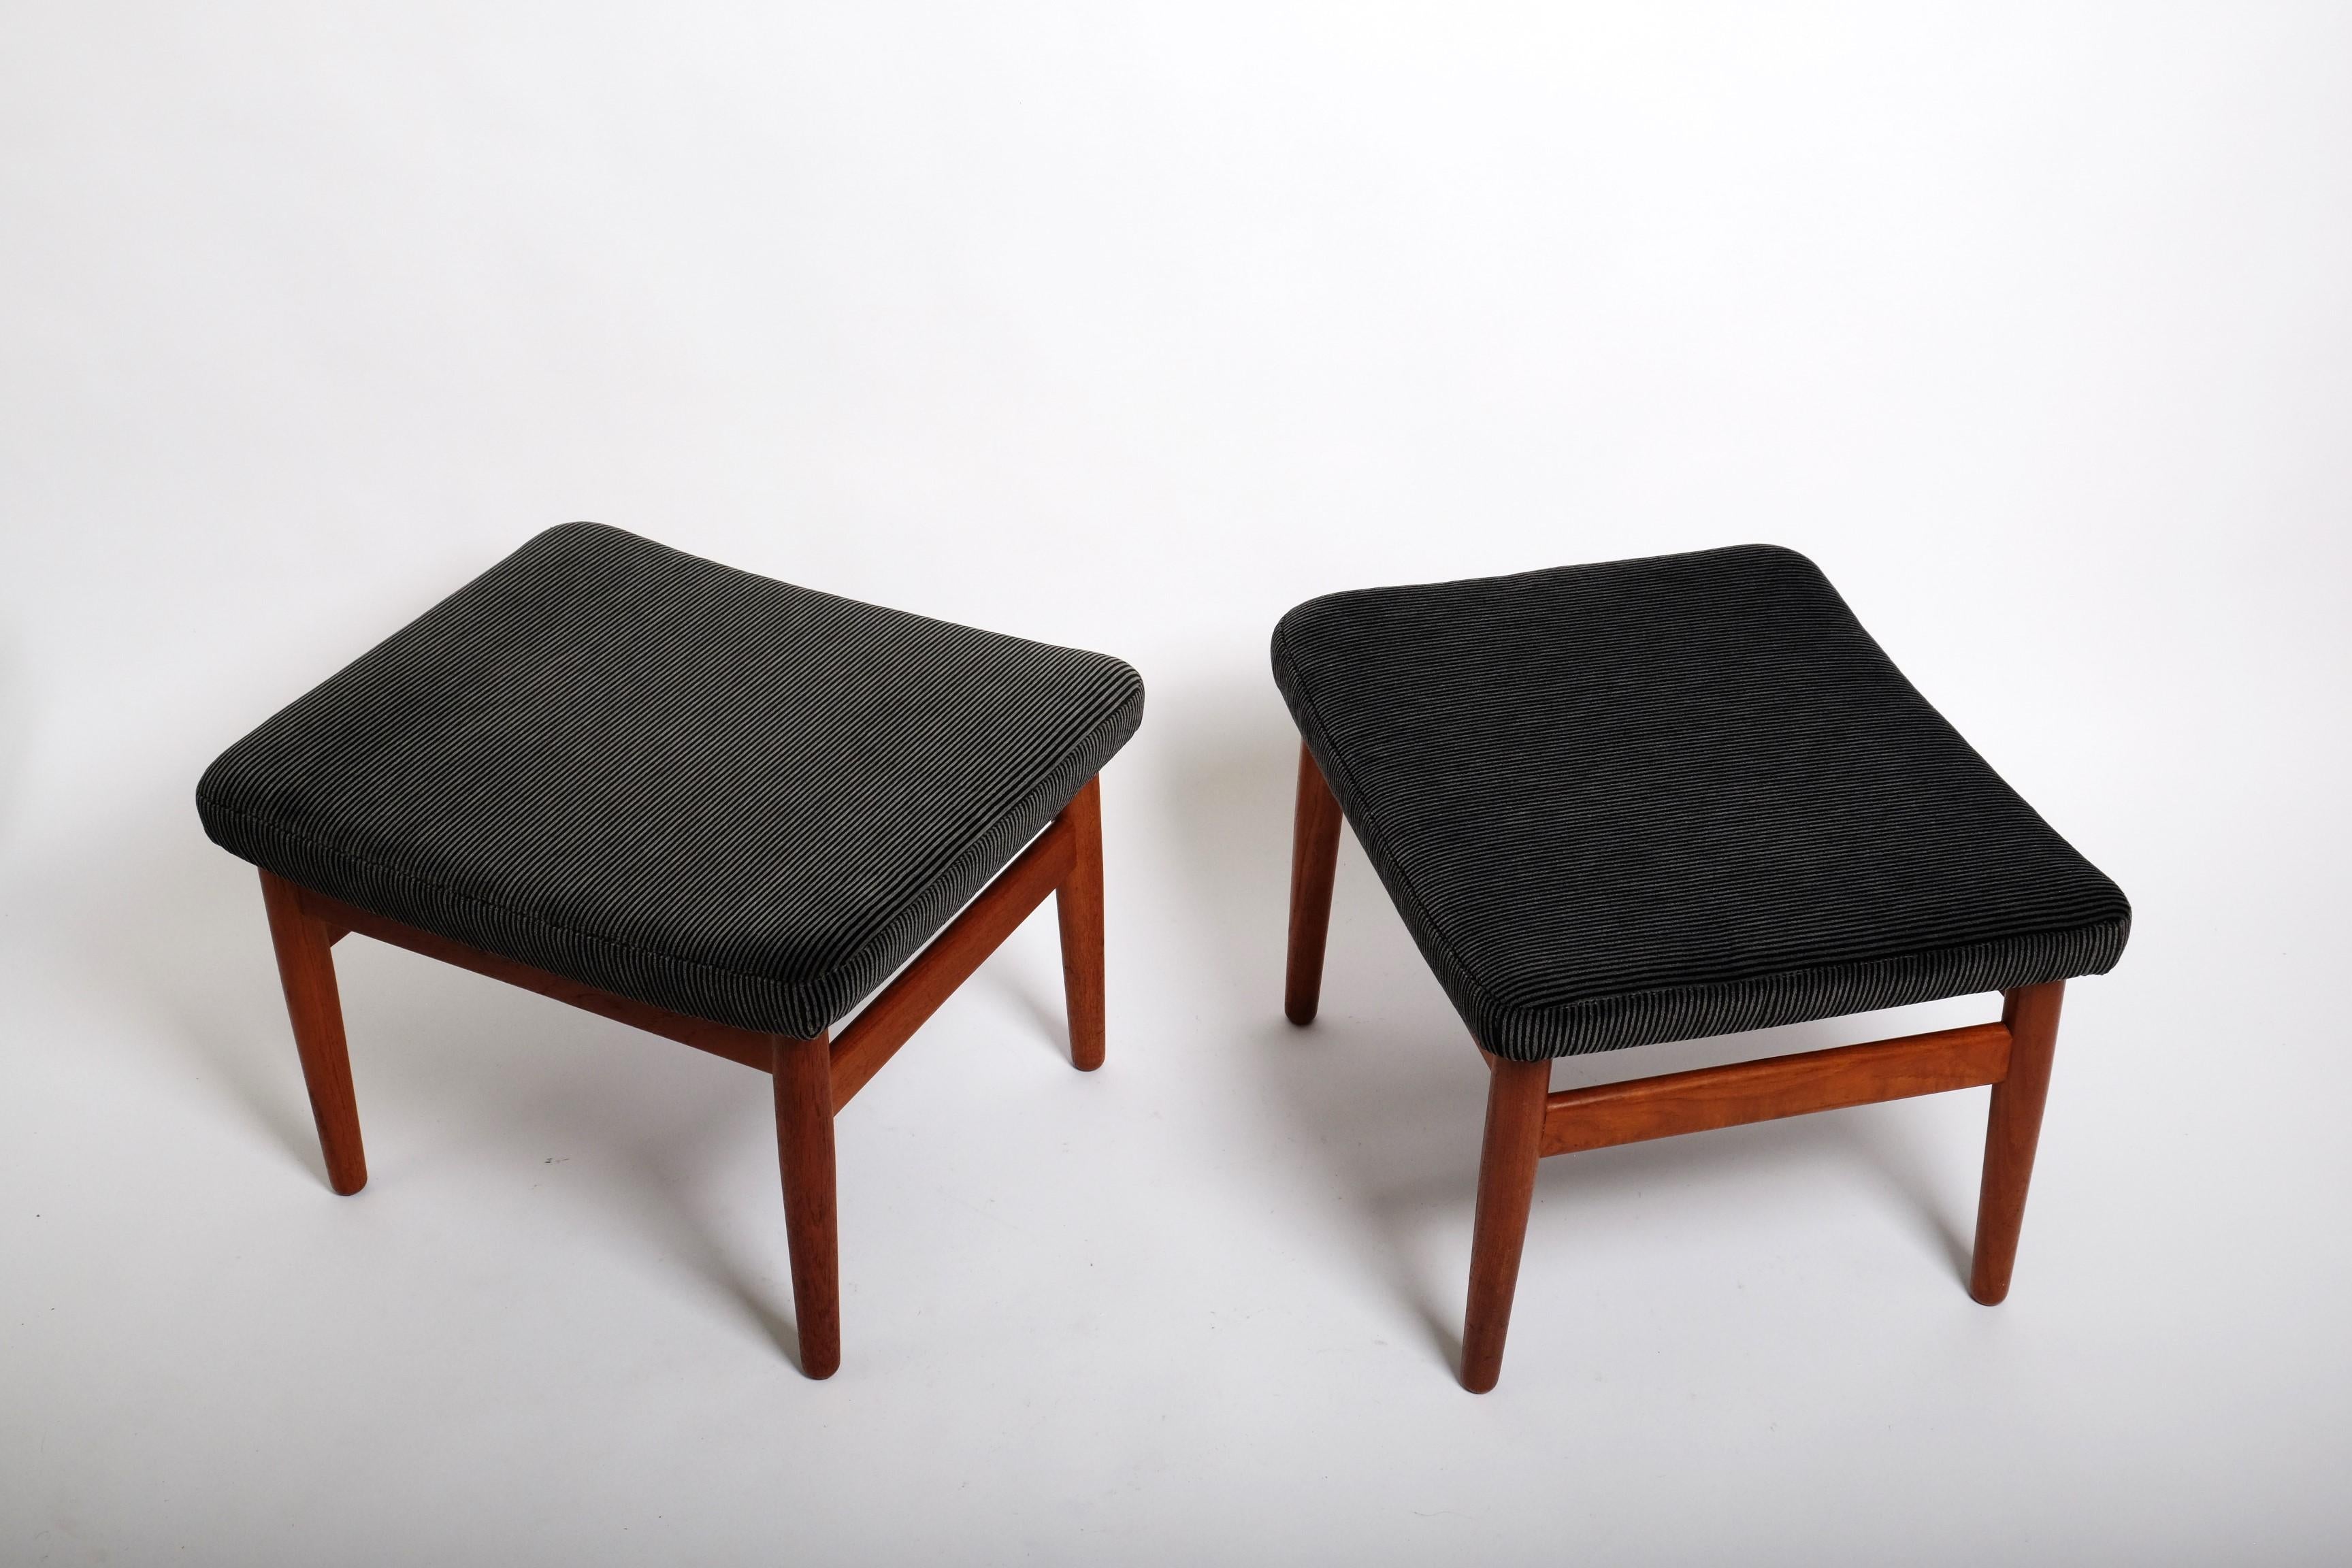 Two Mid-Century Stools by Arne Vodder FD164 Ottomans France & Son, Denmark 1960s For Sale 3